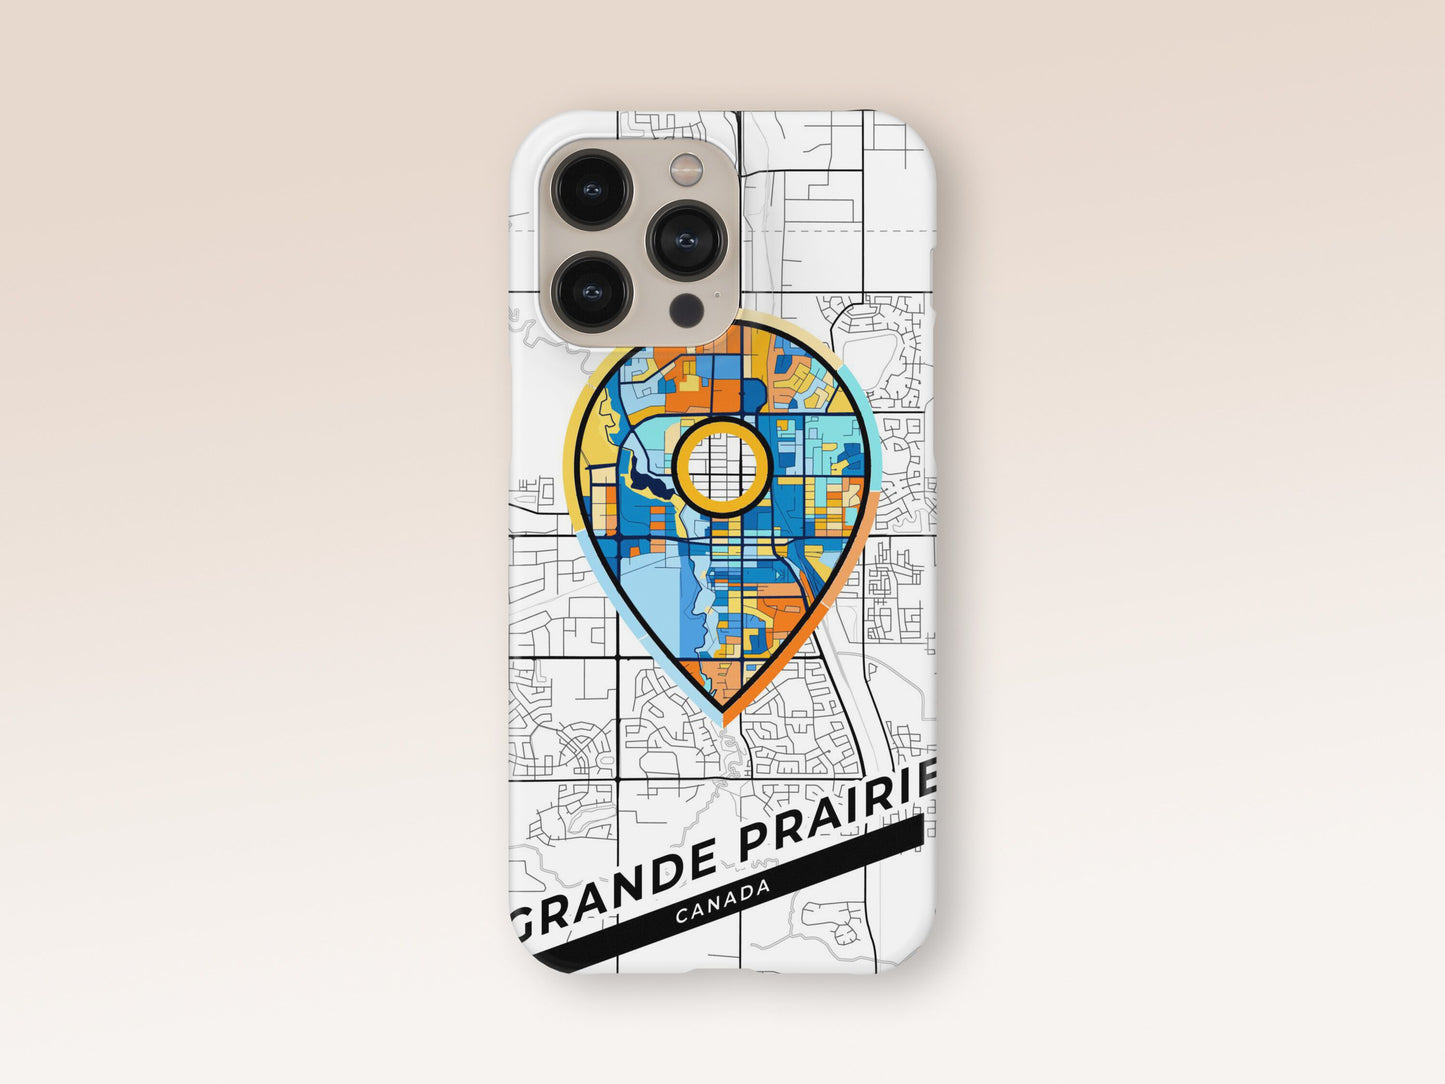 Grande Prairie Canada slim phone case with colorful icon. Birthday, wedding or housewarming gift. Couple match cases. 1